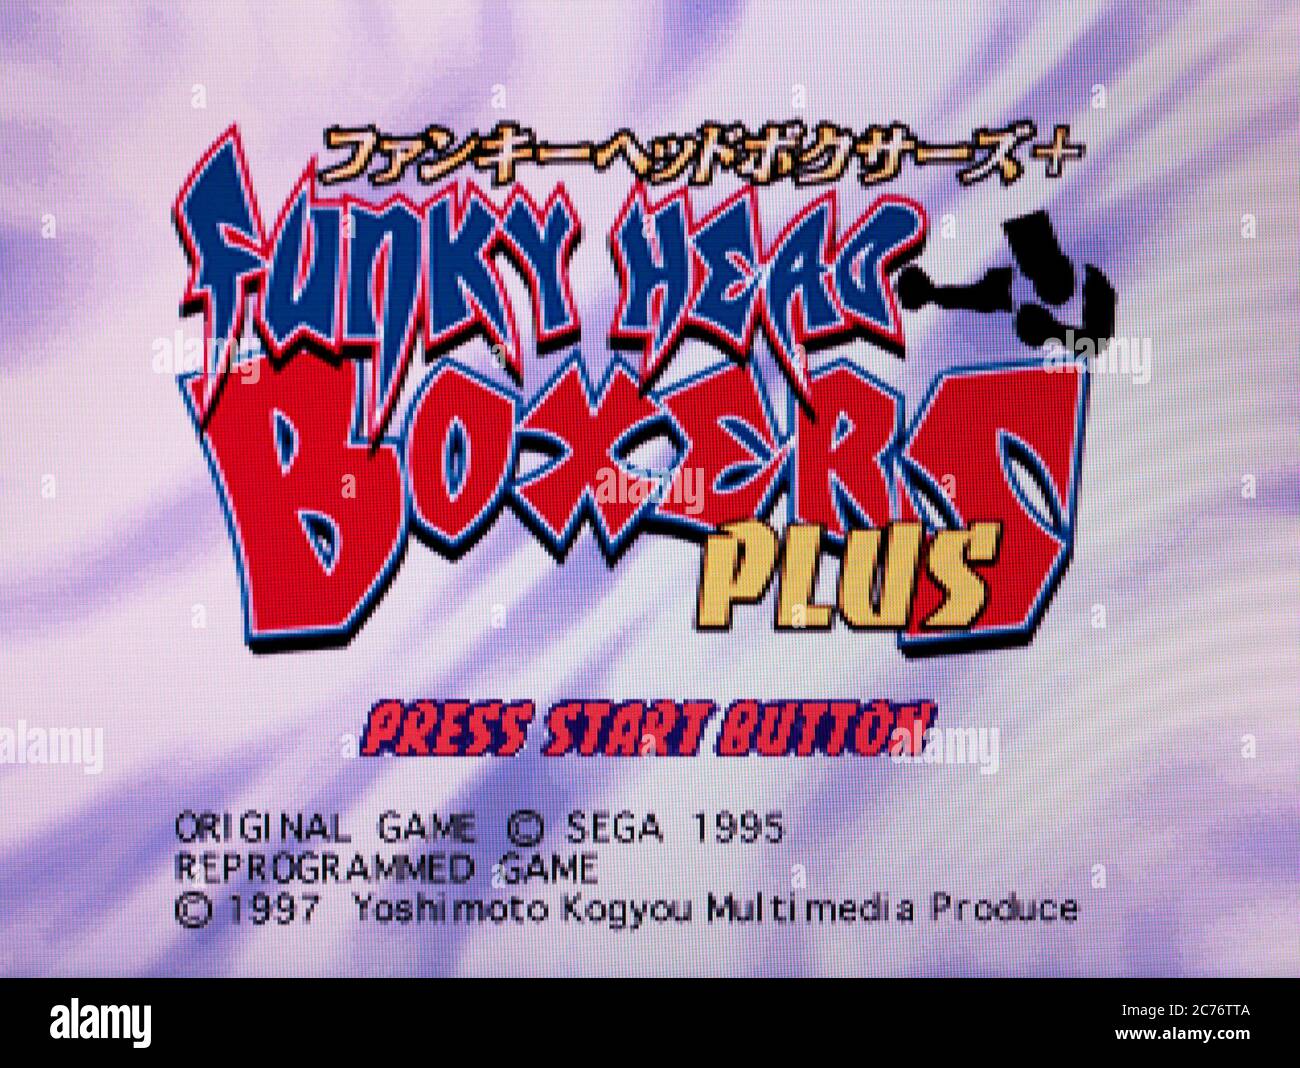 Funky Head Boxers Plus - Sega Saturn Videogame - Editorial use only Stock Photo